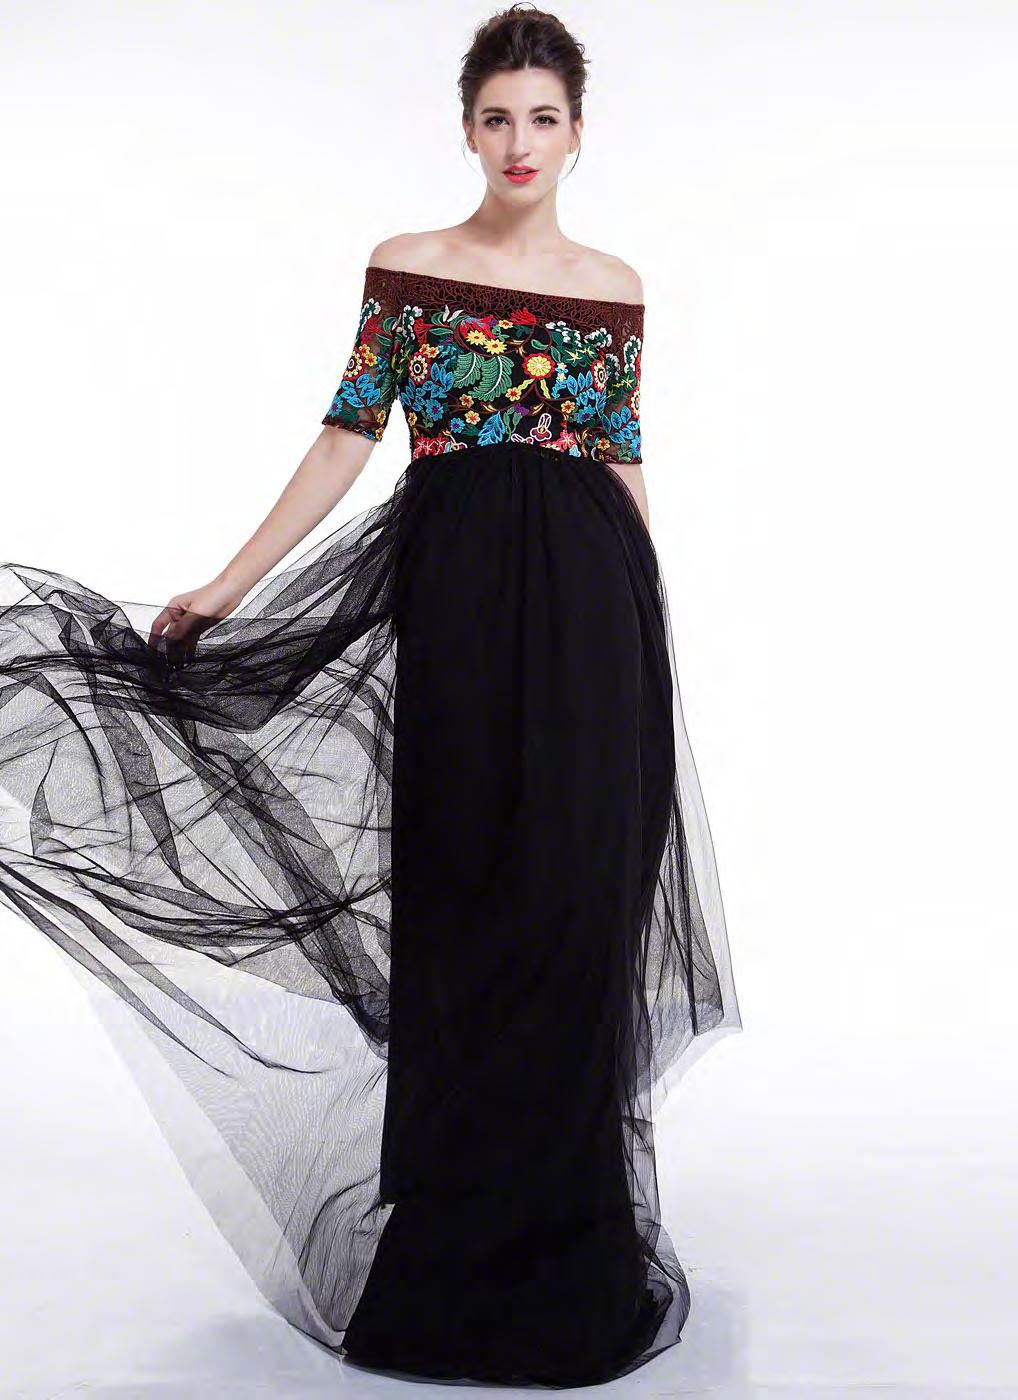 Bohemian style never looked so elegant as this marvelous off-the-shoulder evening gown. With its bold print and full black tulle skirt you're certain to turn more heads than the art on the walls.